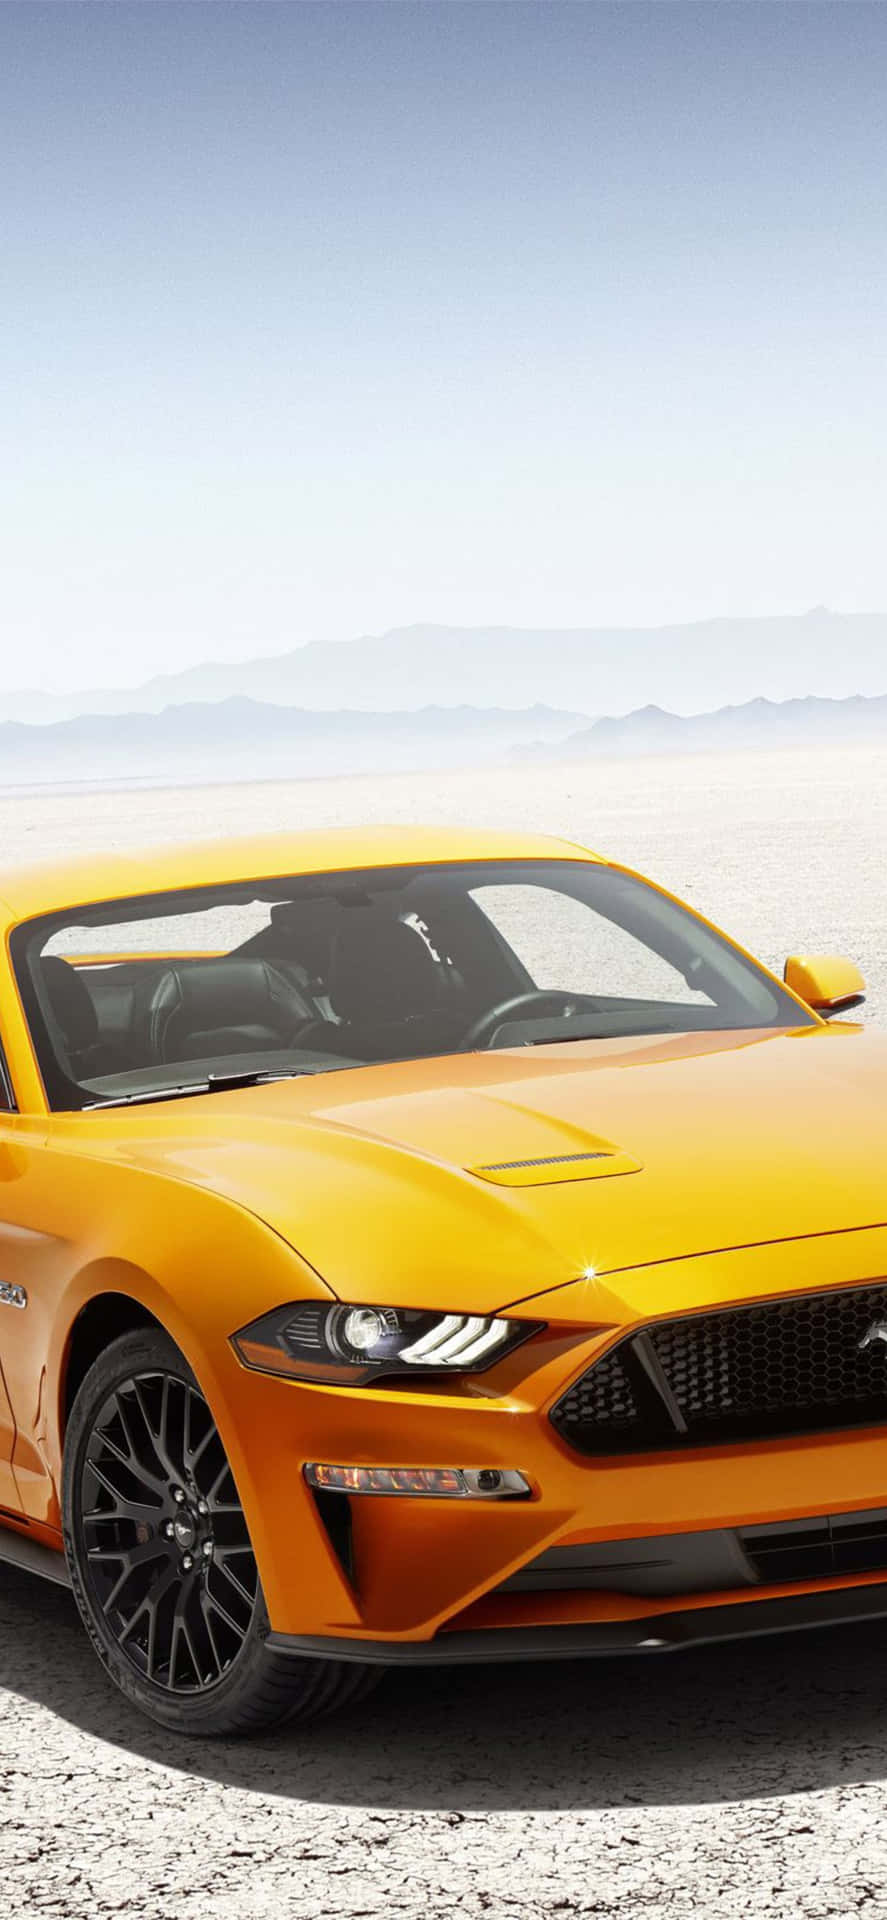 The 2019 Ford Mustang Gt Is Shown In The Desert Wallpaper